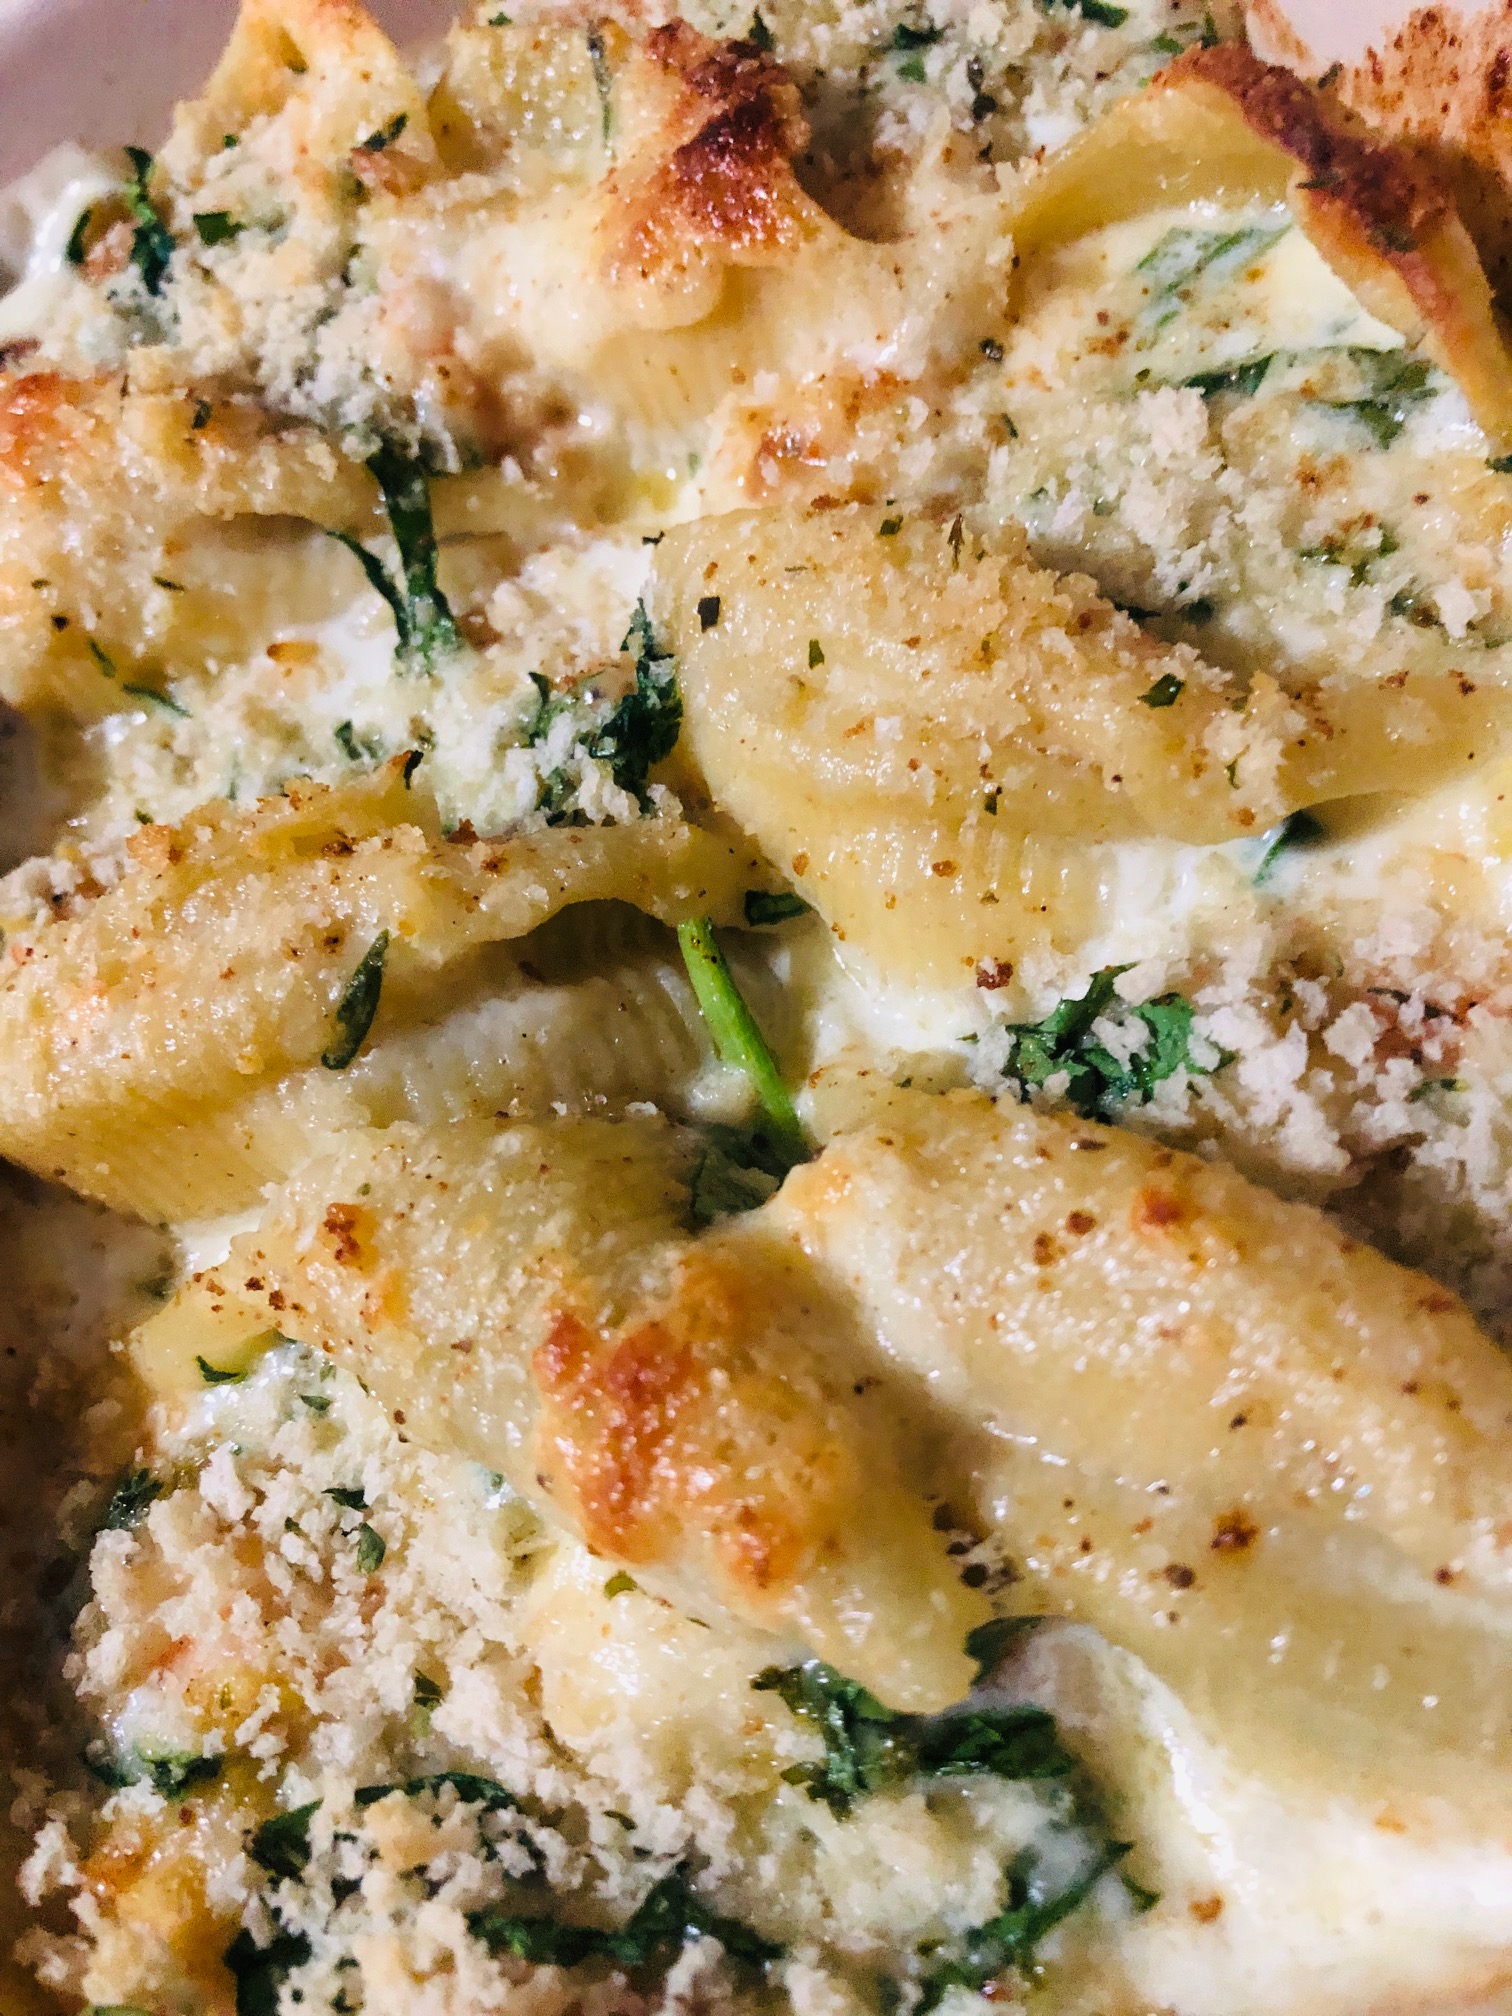 Jumbo pasta shells stuffed with seafood, spinach, and cream sauce topped with panko crumbs and parmesan cheese